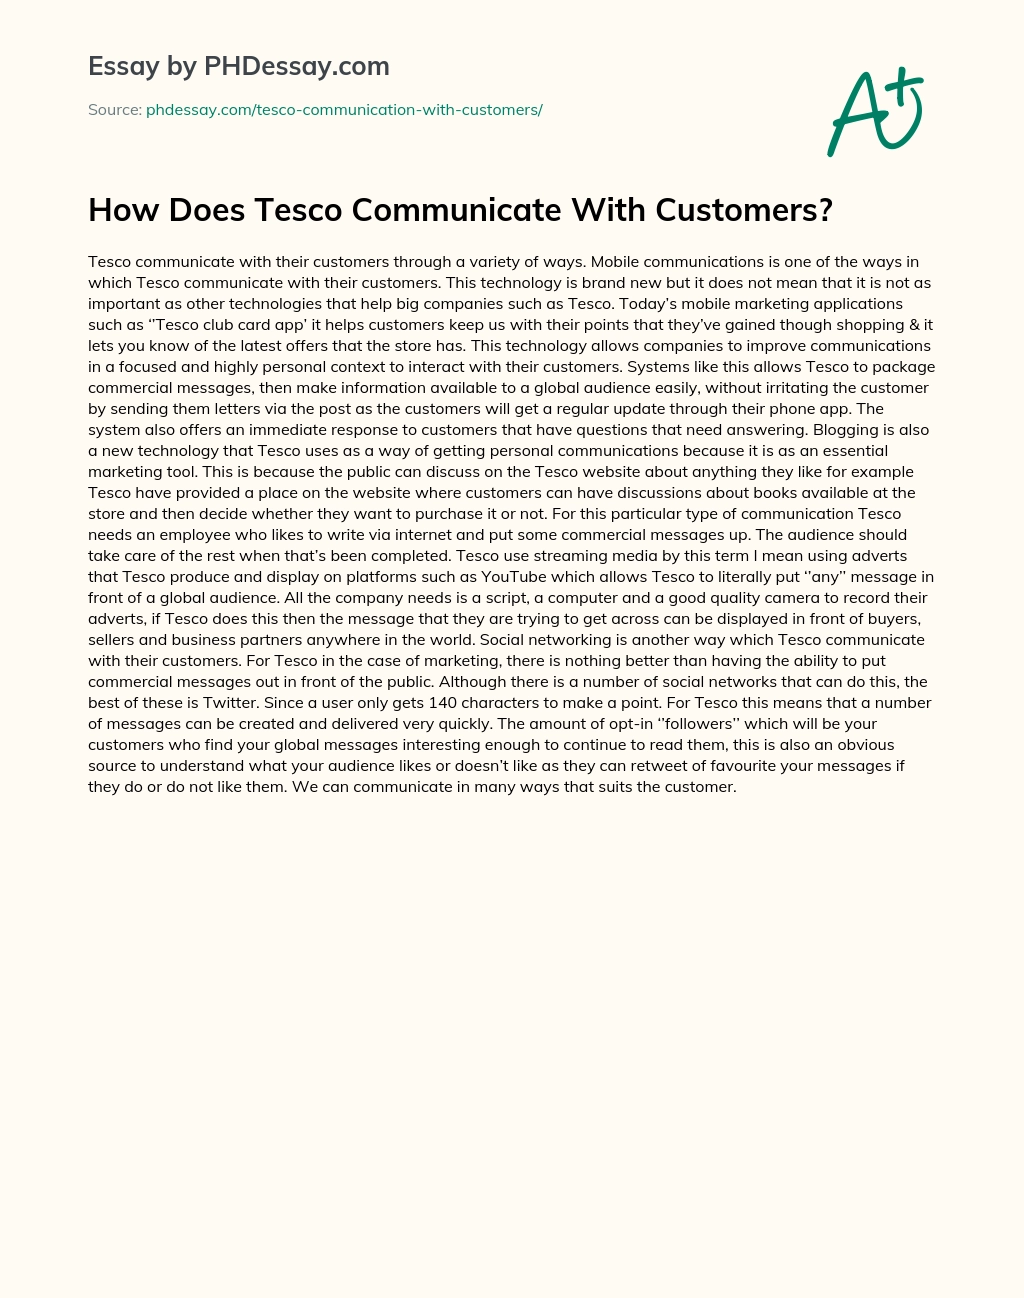 How Does Tesco Communicate With Customers? essay